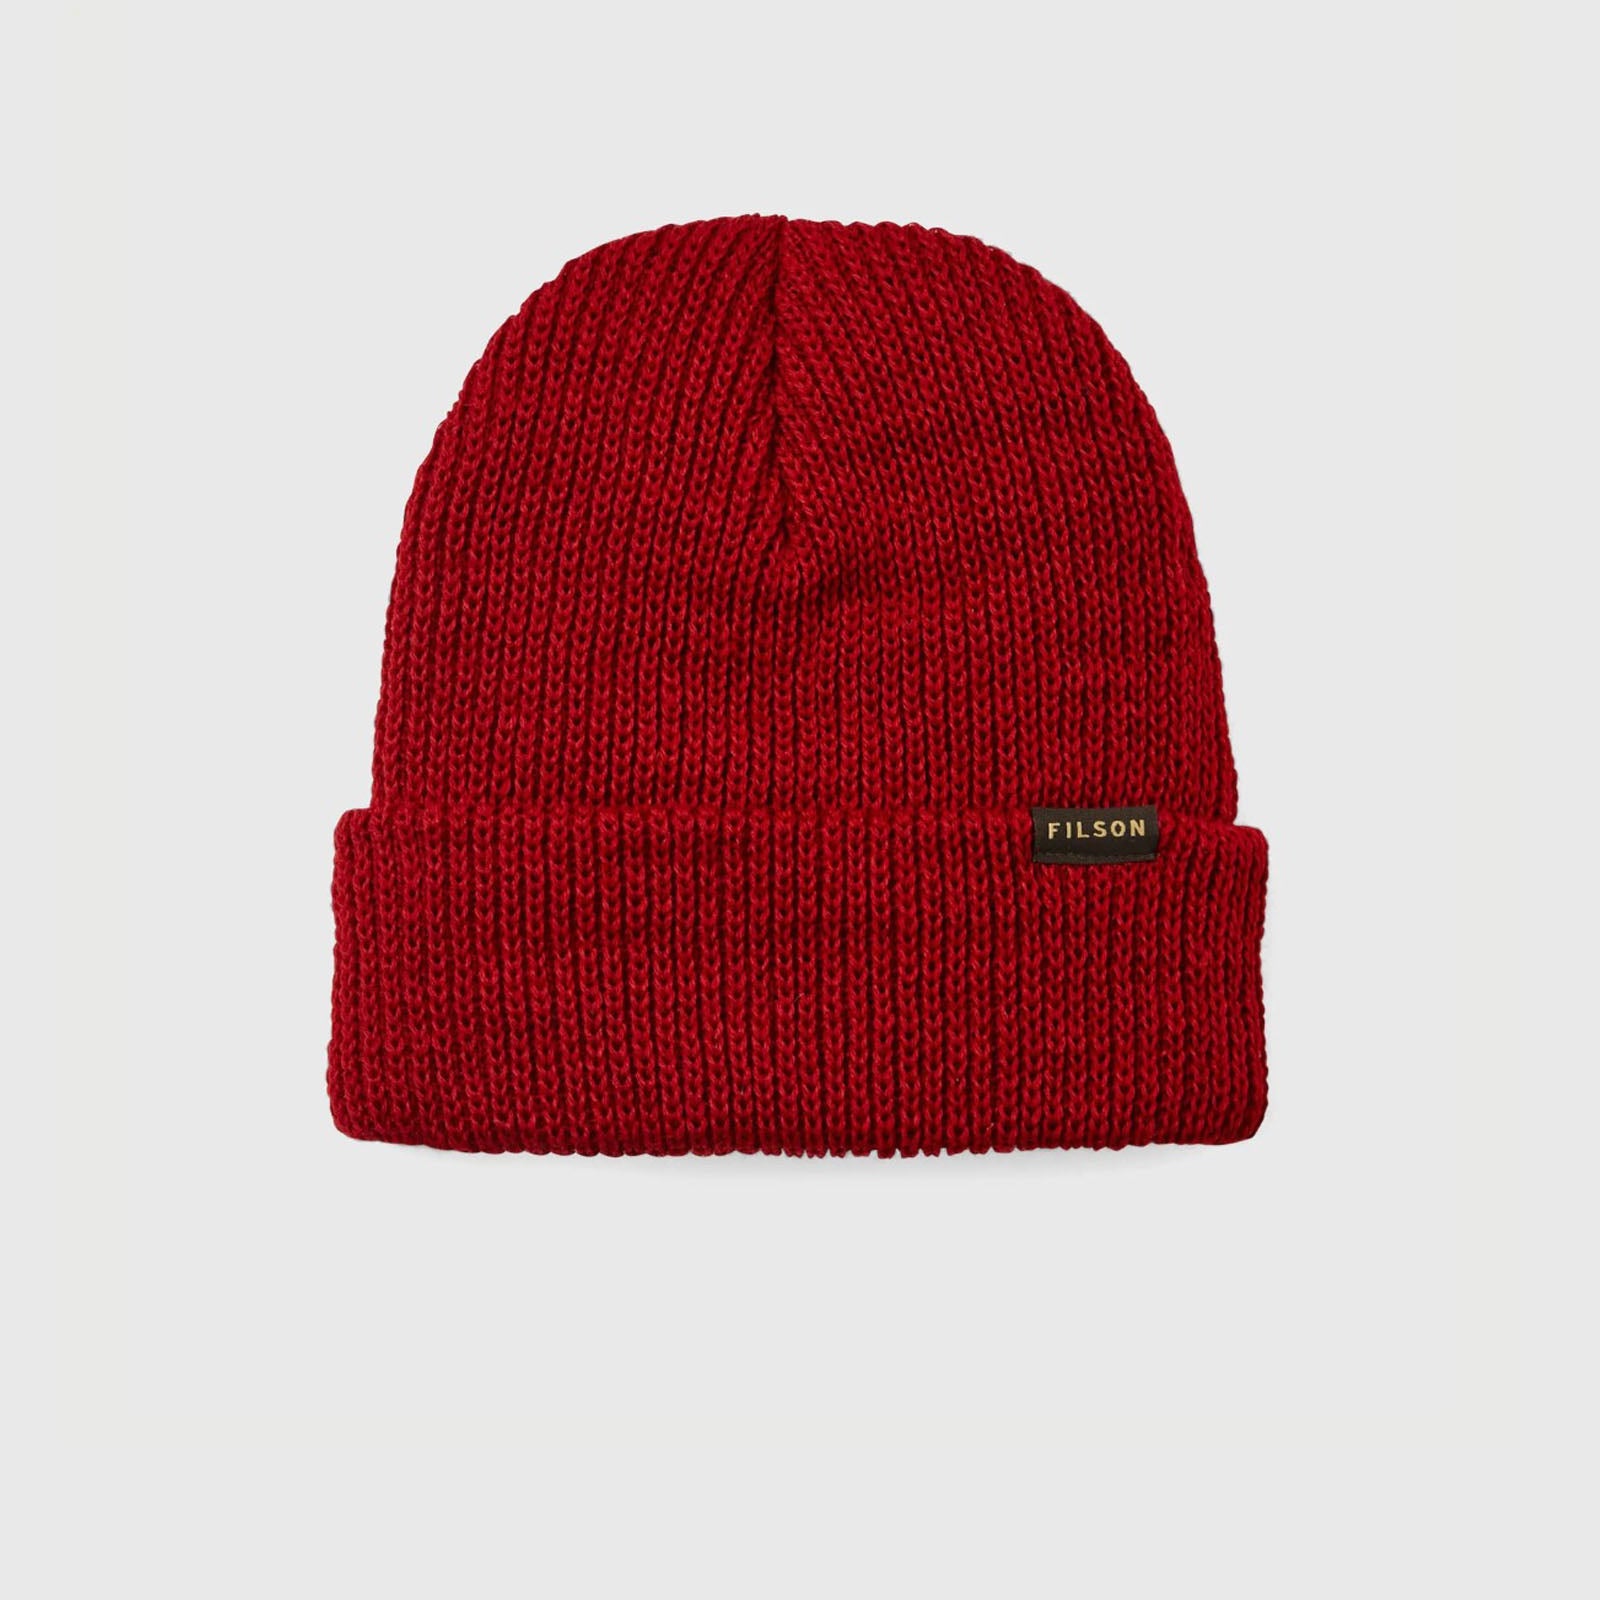 Filson Watch Synthetic Wool Cap Red - 2